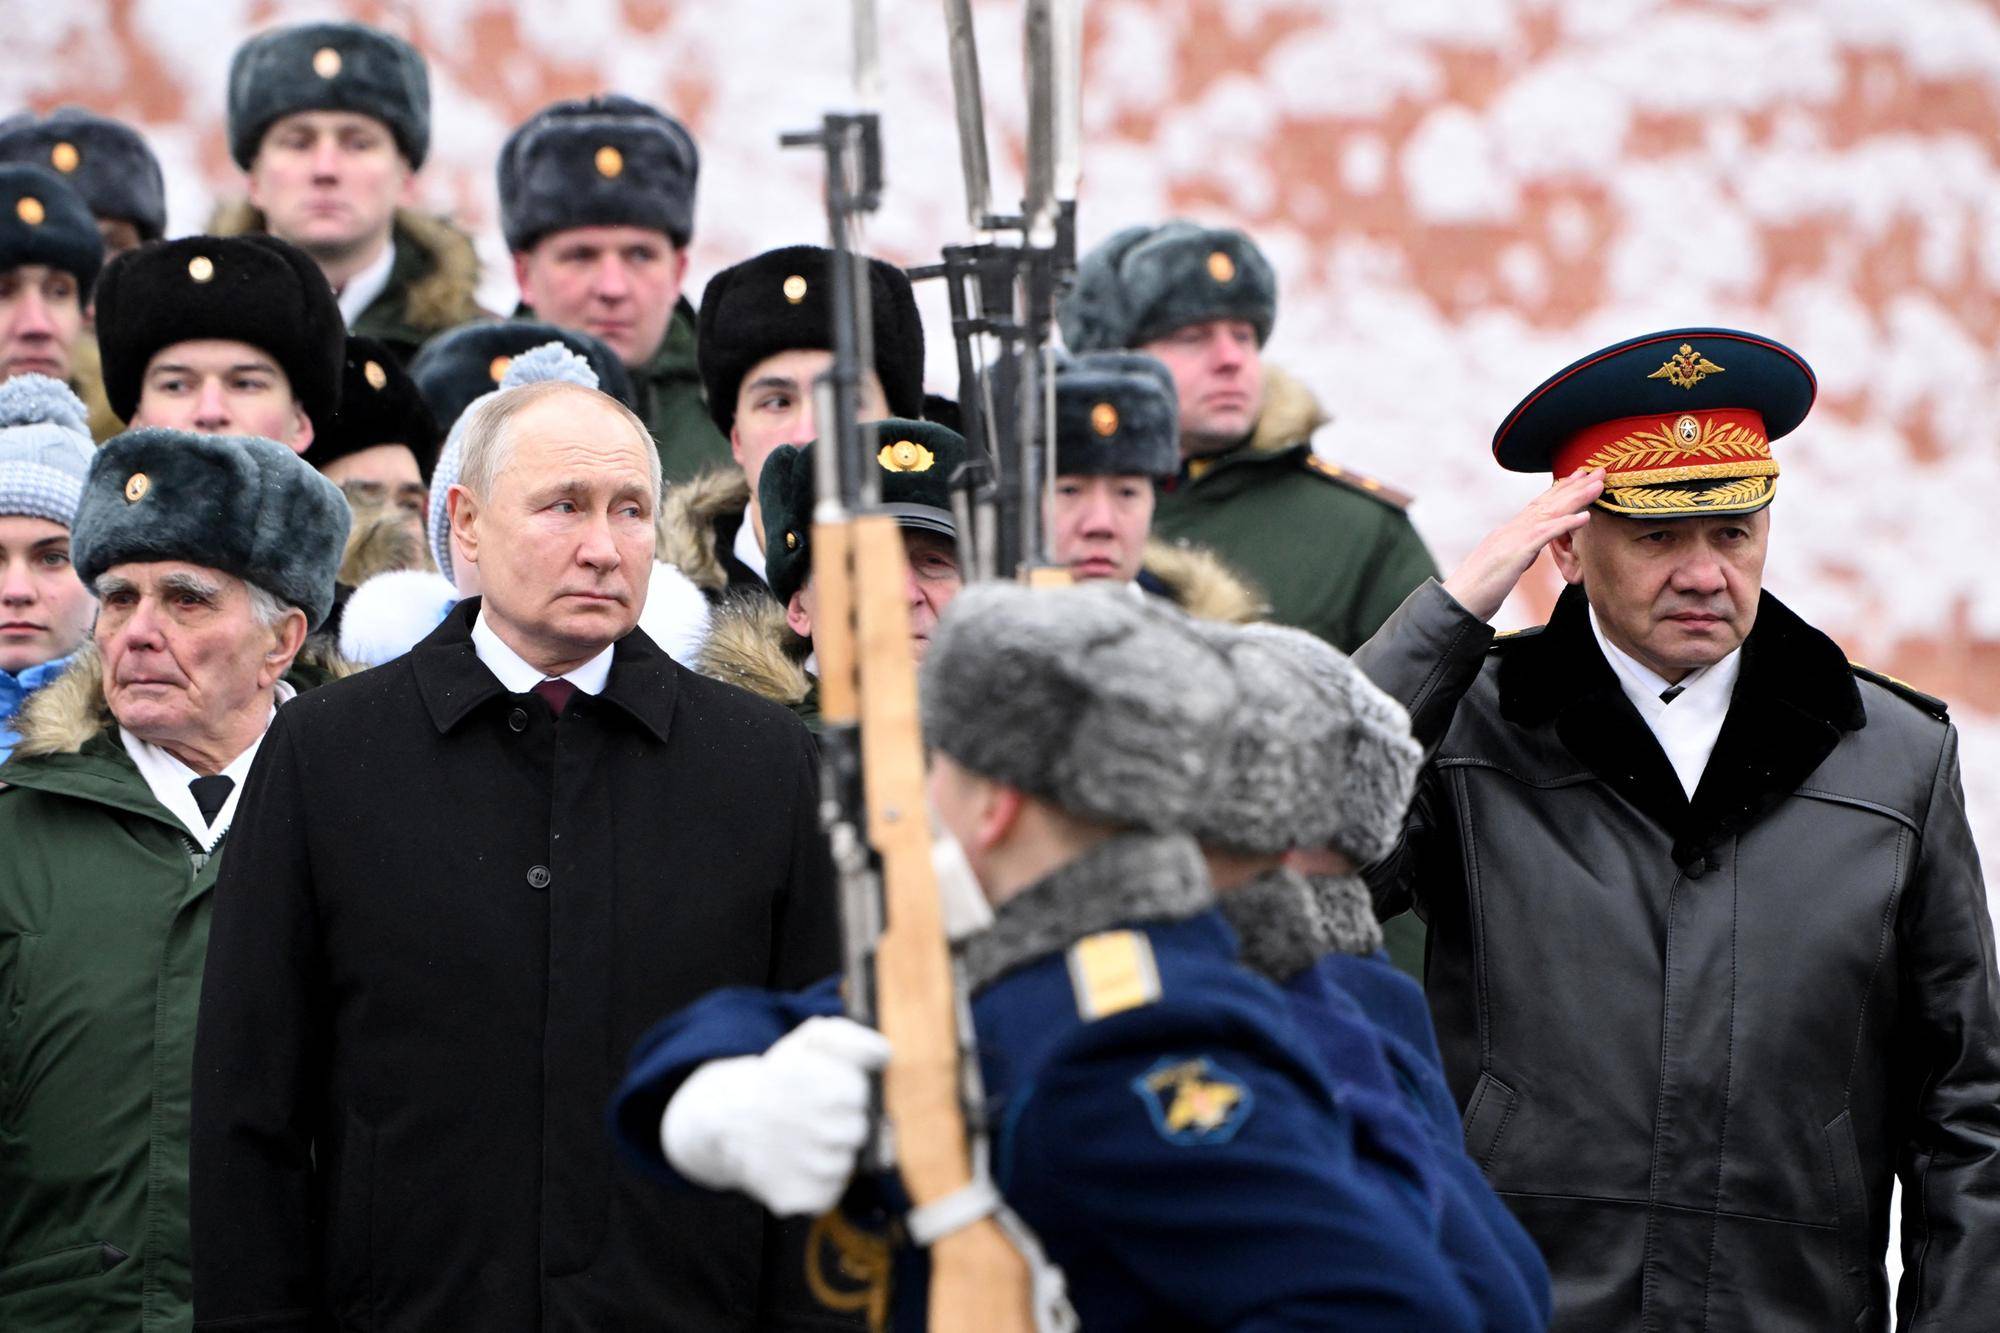 Russia's president Vladimir Putin, accompanied by defence minister Sergei Shoigu, attends a wreath-laying ceremony at the Tomb of the Unknown Soldier by the Kremlin Wall in Moscow. Picture: Sergei Savostyanov/AFP via Getty Images